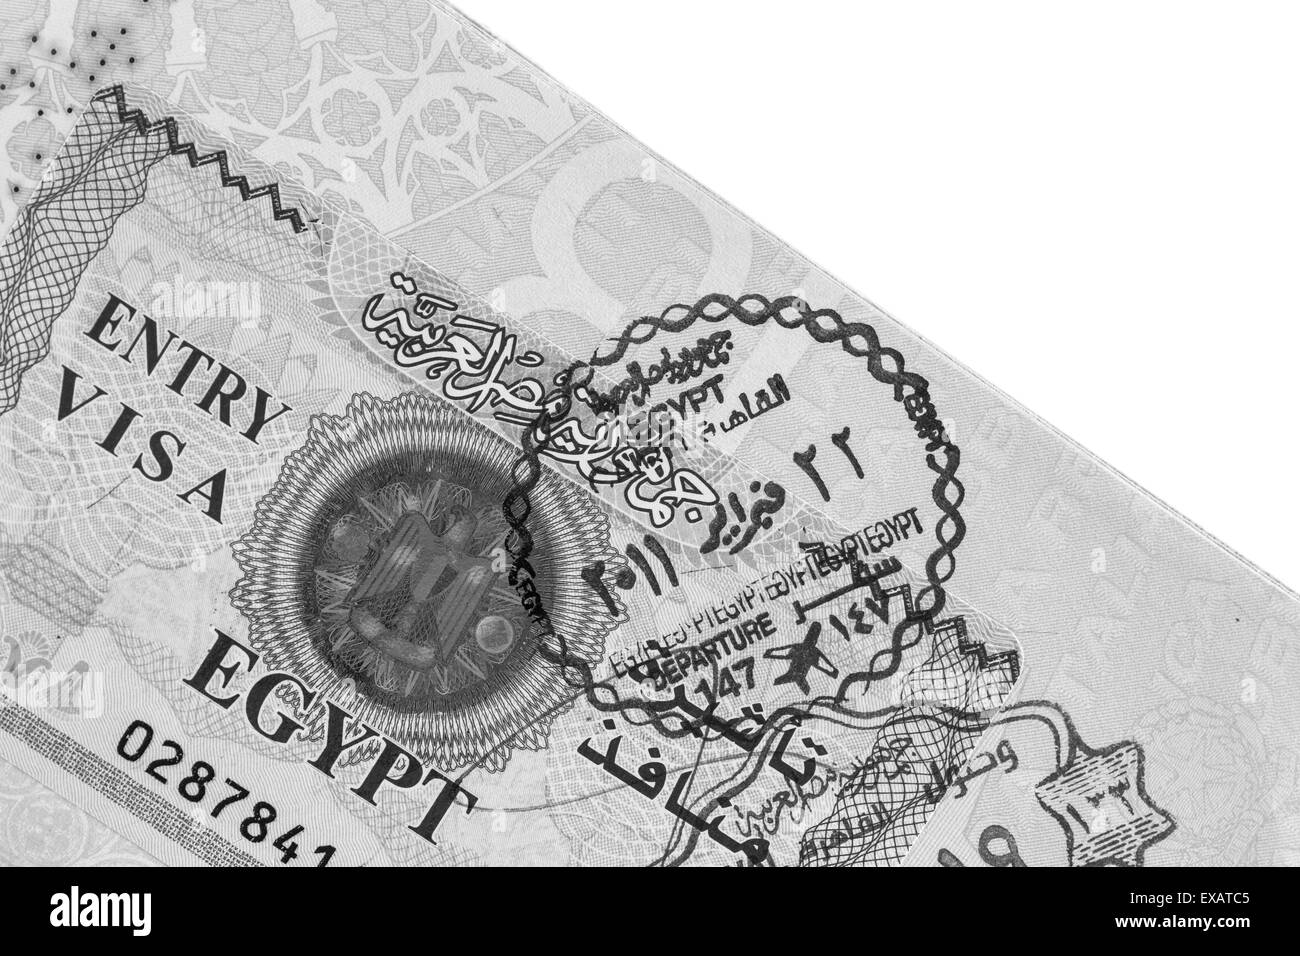 Detail of Egyptian Entry Visa on a real passport Stock Photo